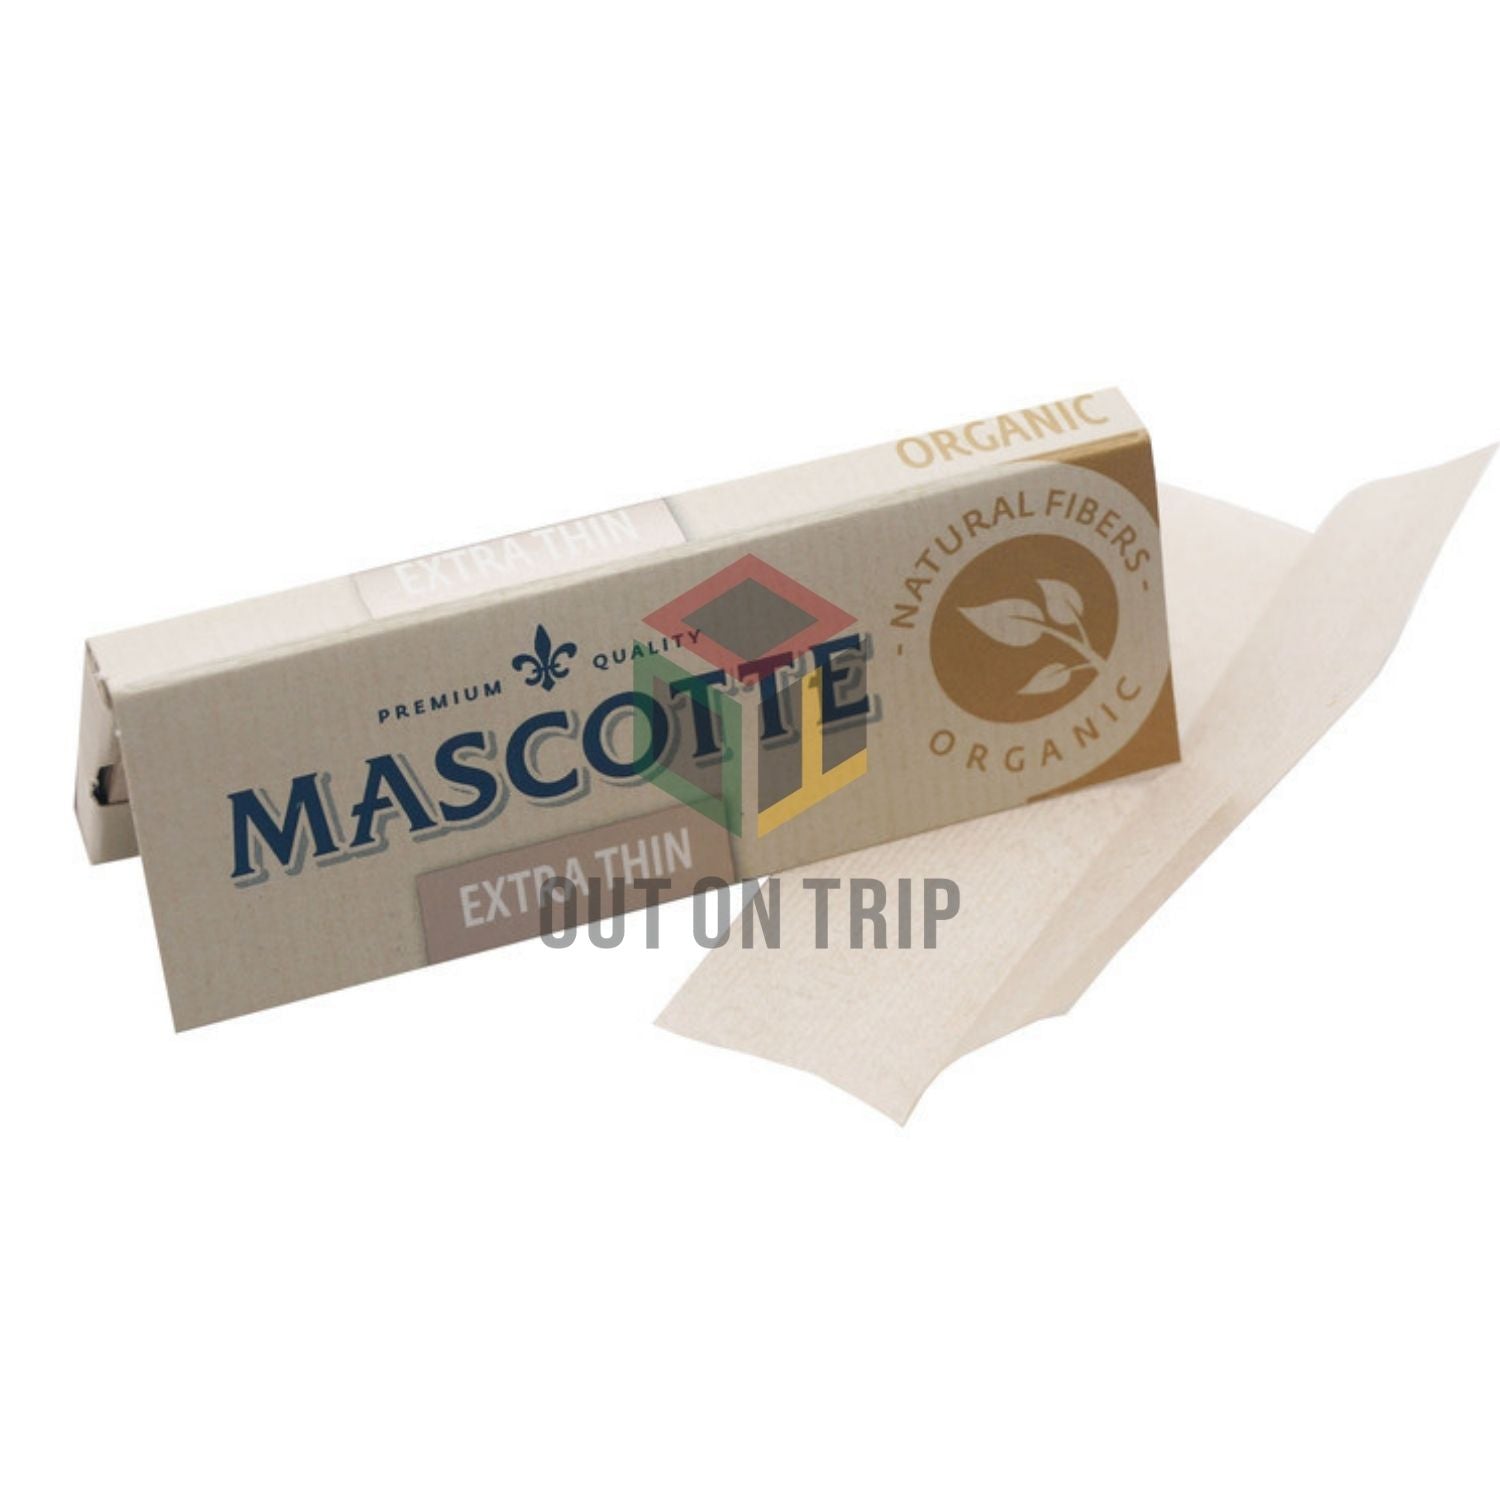 MASCOTTE Extra Thin Rolling Paper 1 1/4 - 50 Leaves